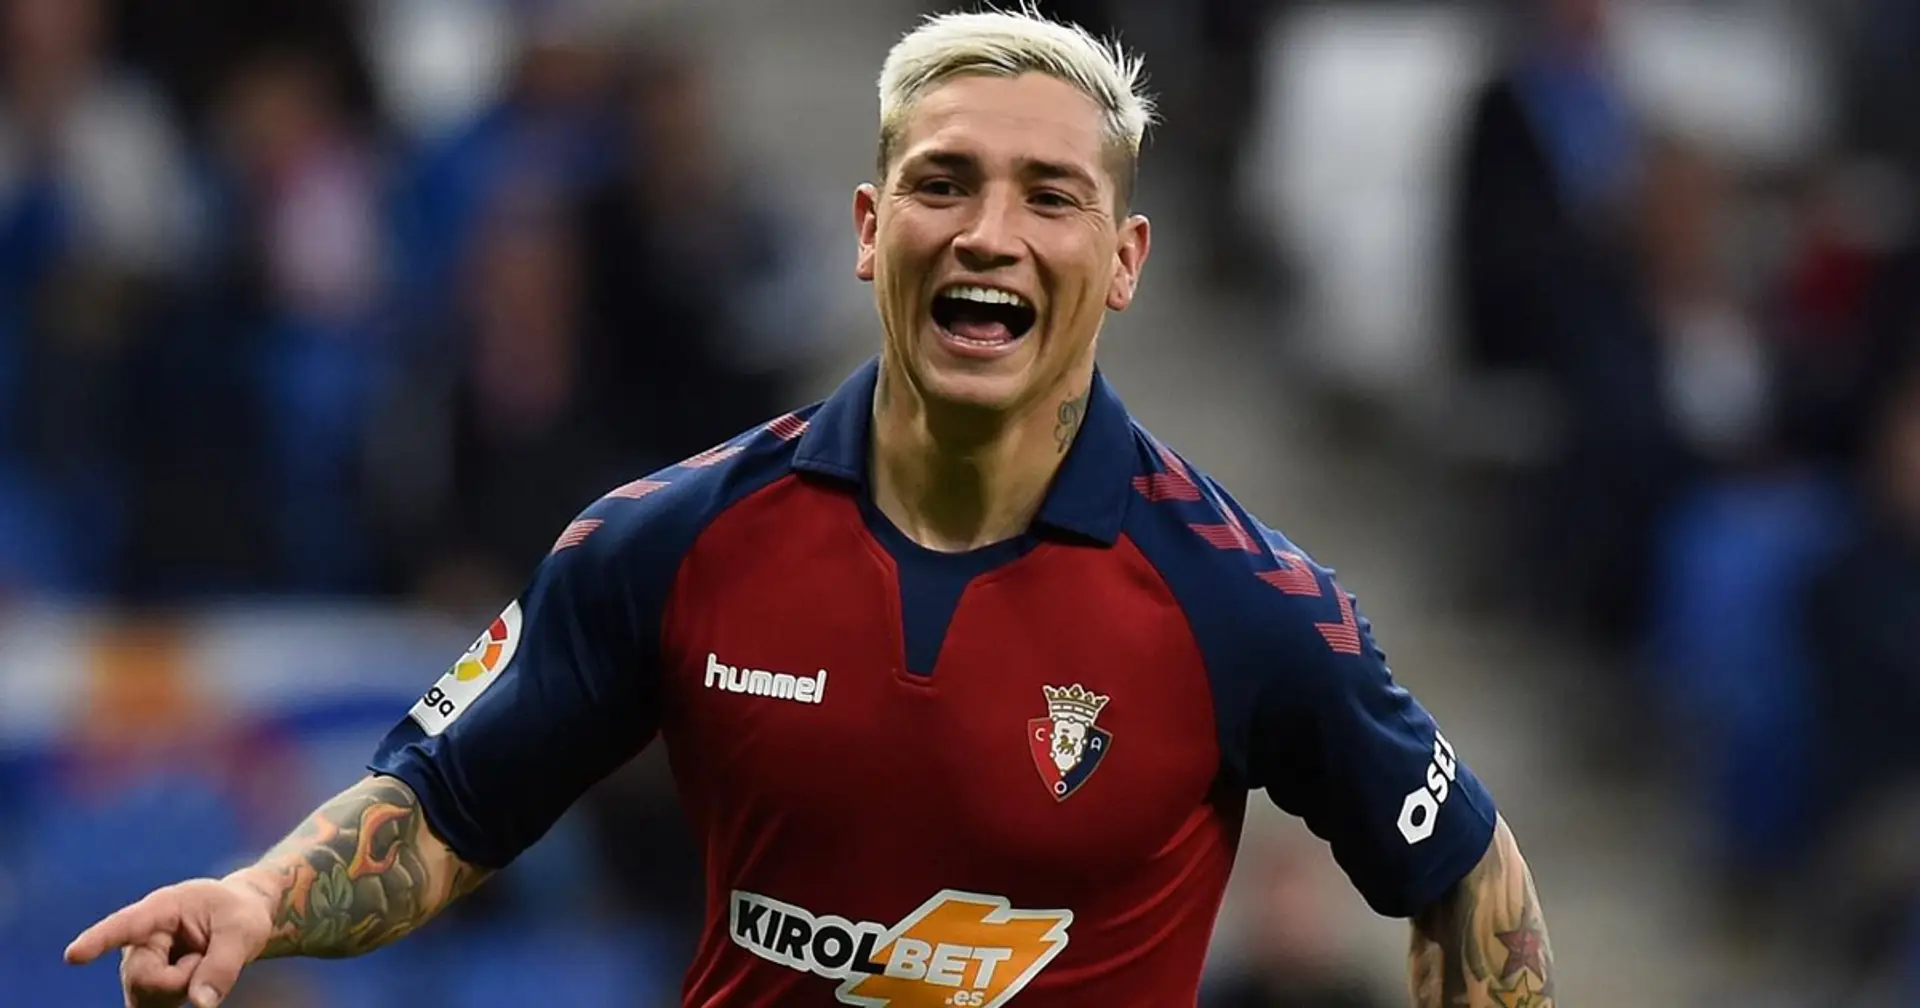 'I would've joined Barcelona in a heartbeat': Osasuna attacker Chimy Avila reflects on failed Camp Nou switch